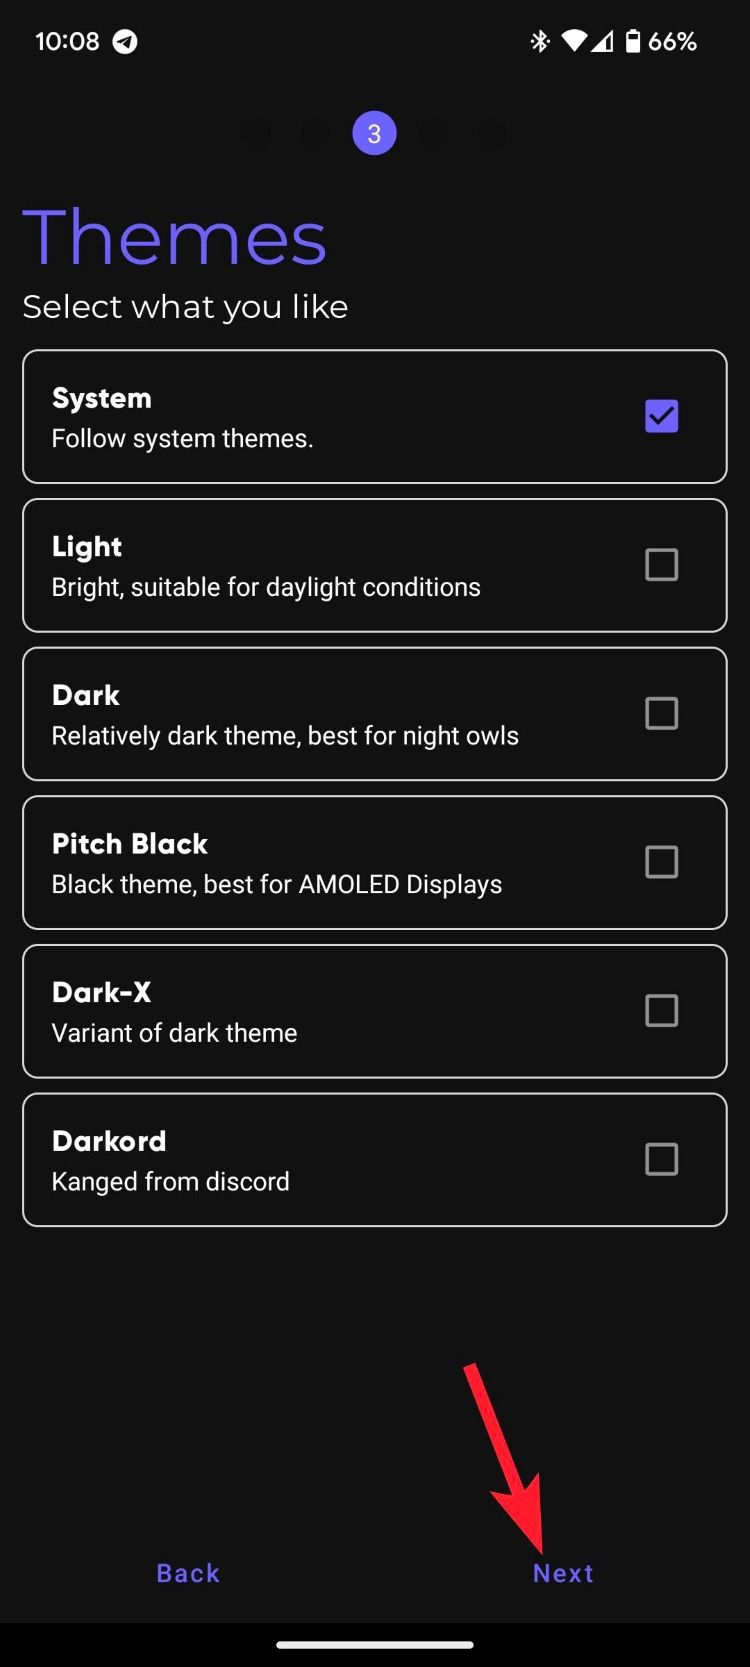 The Themes page in the Aurora Store app with the System option selected and a red arrow pointing to the Next button